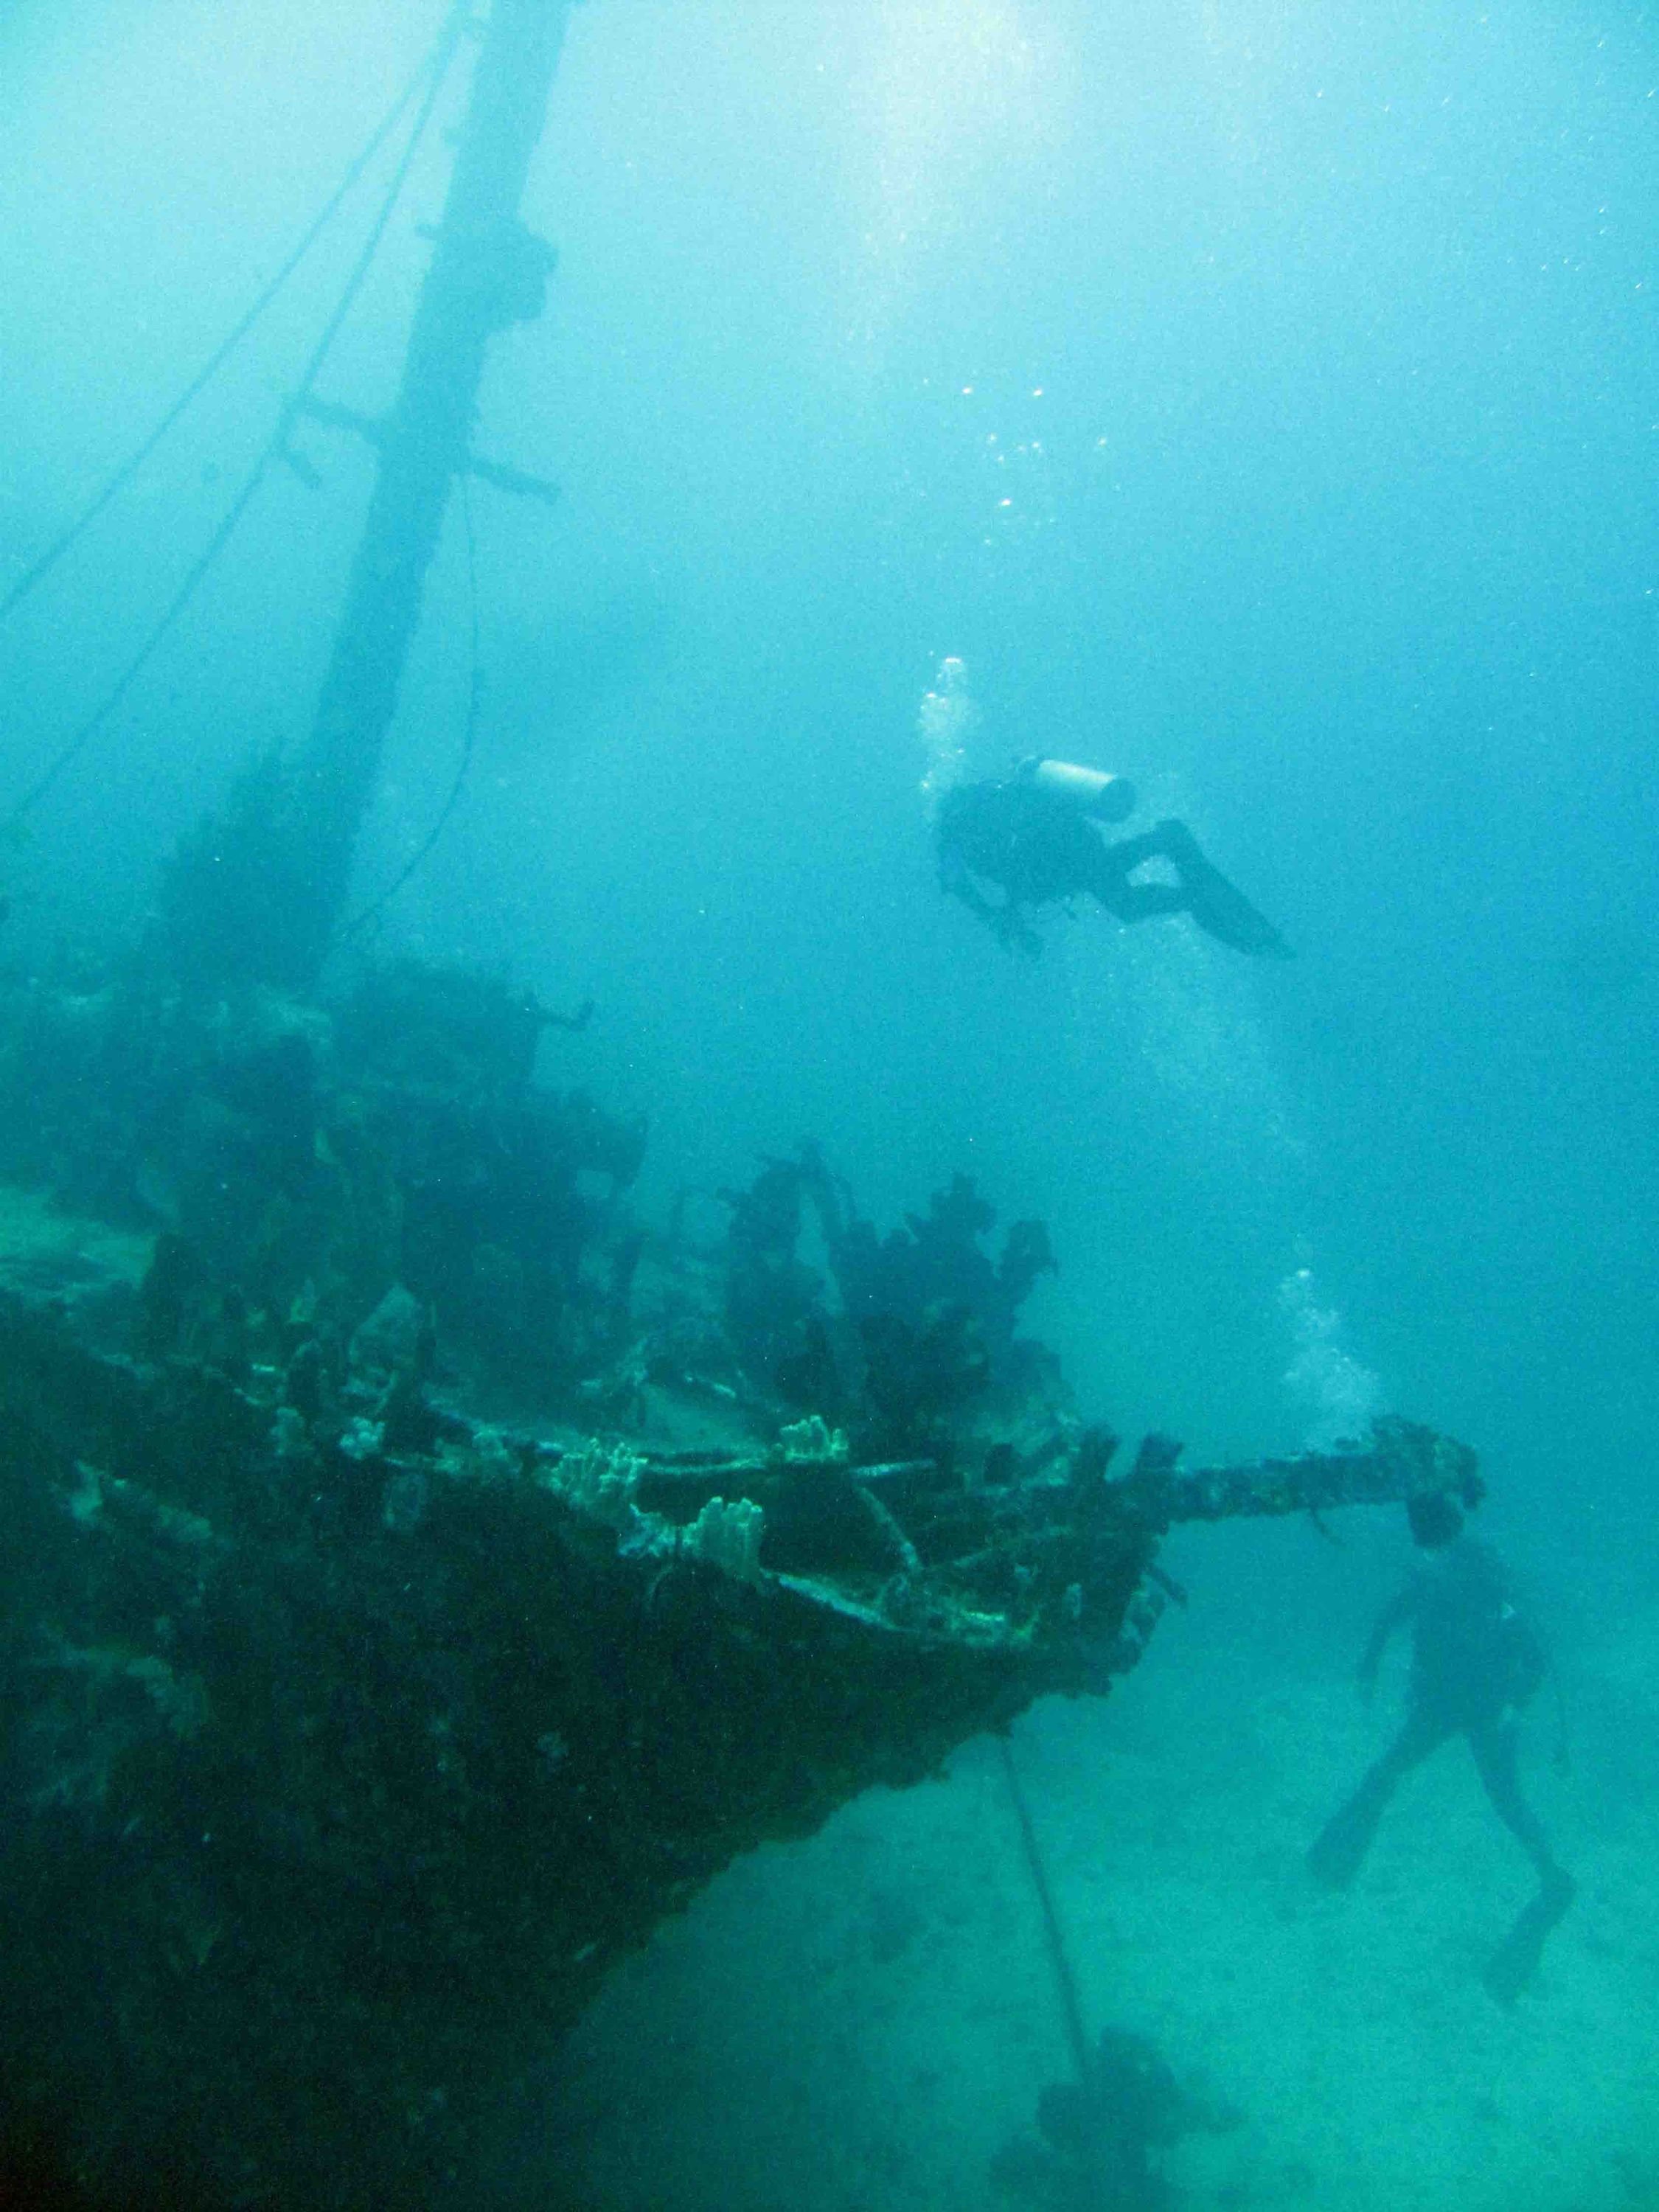 Wreck of the Anne